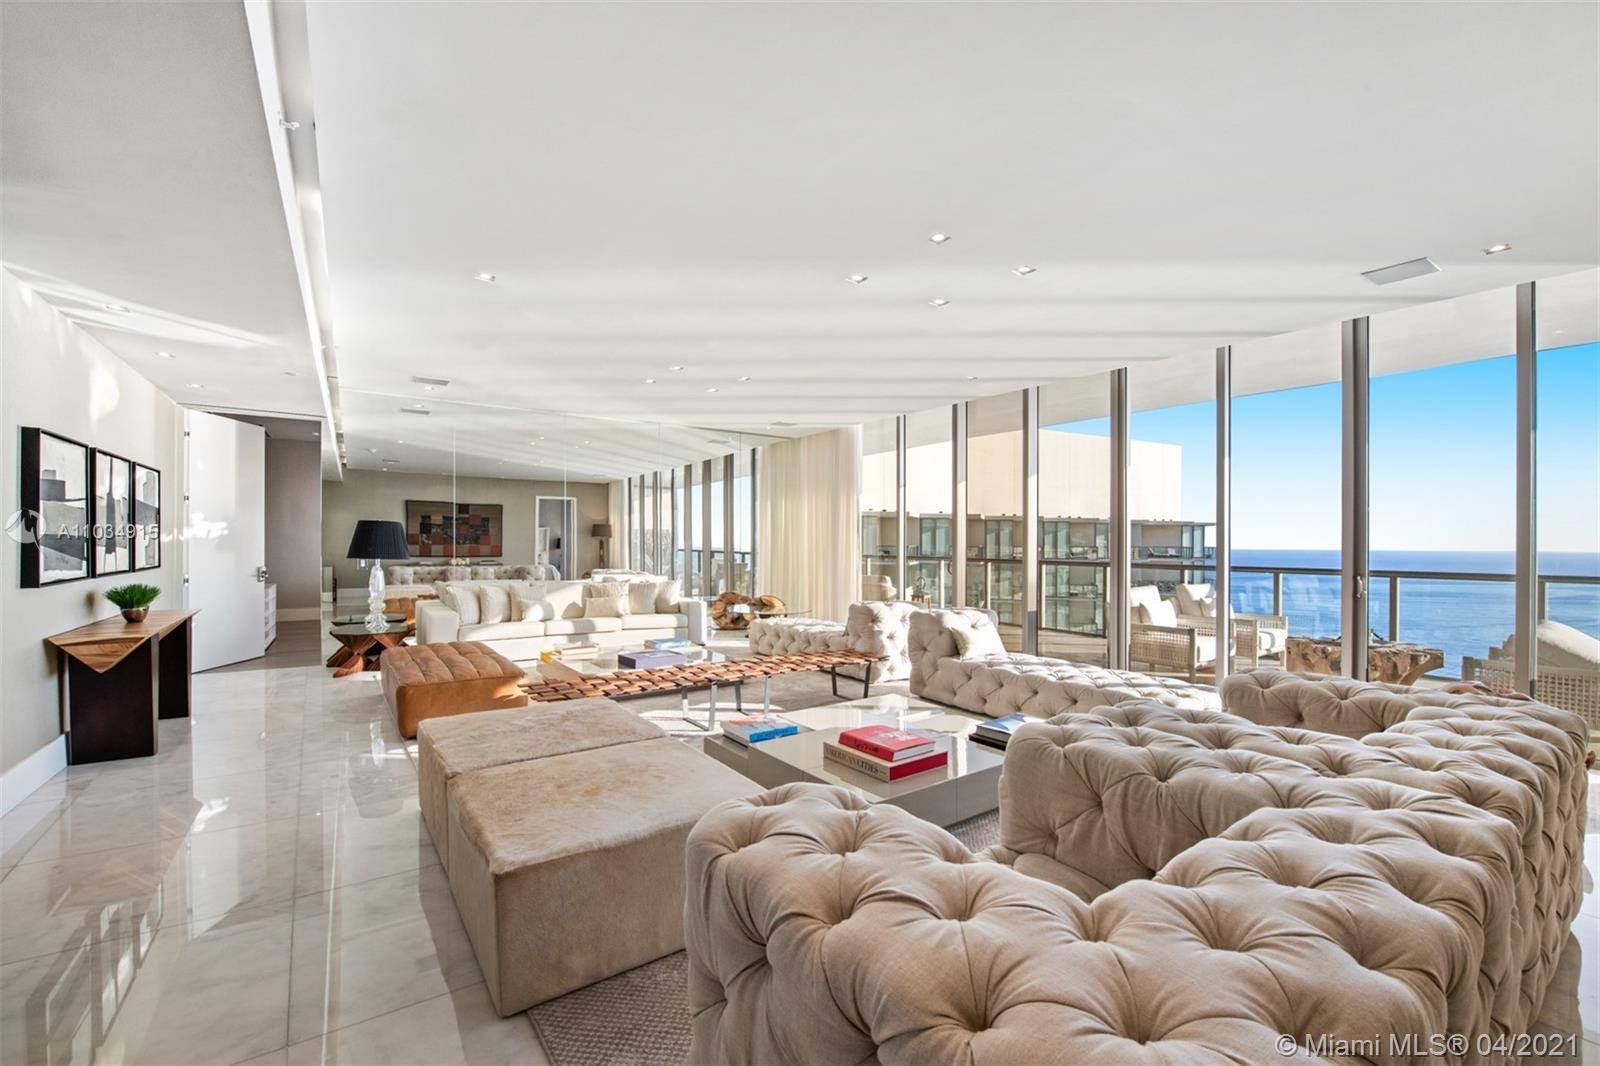 Unique Penthouse Residence avaialbe for lease at the prestigious St Regis.